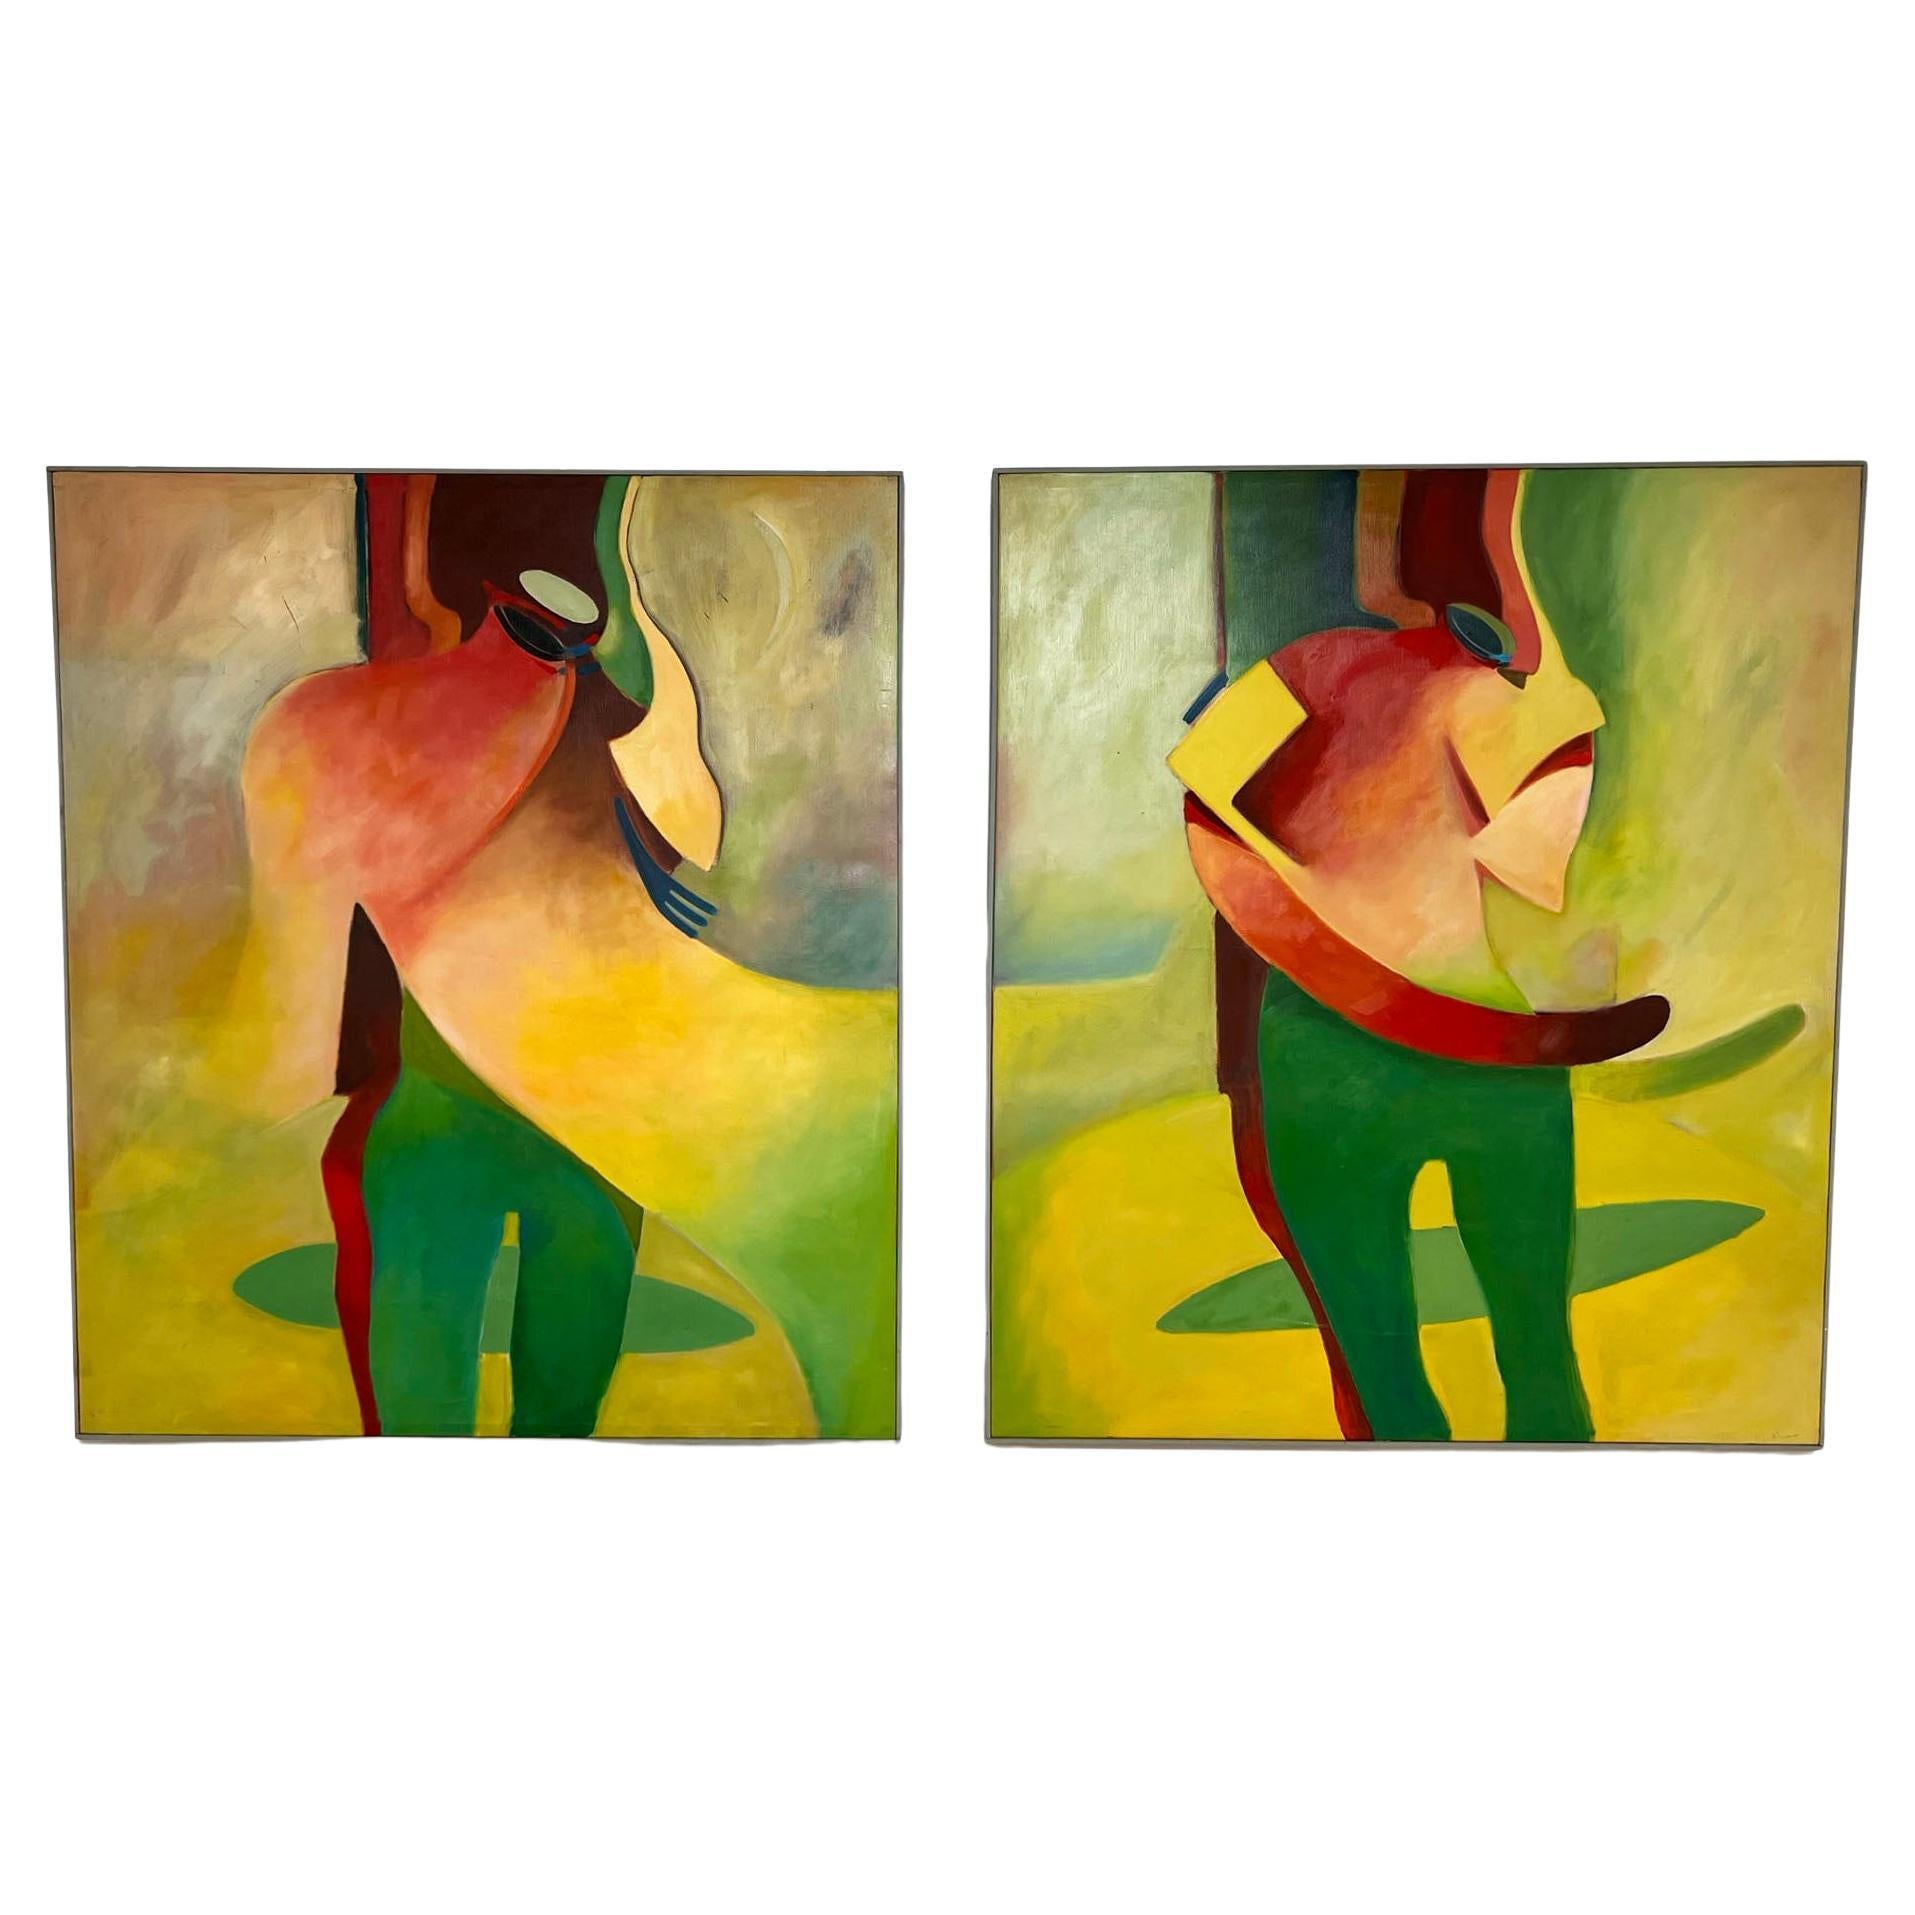 Abstract Expressionist Diptych Painting Signed L. Alicea, D. 1981